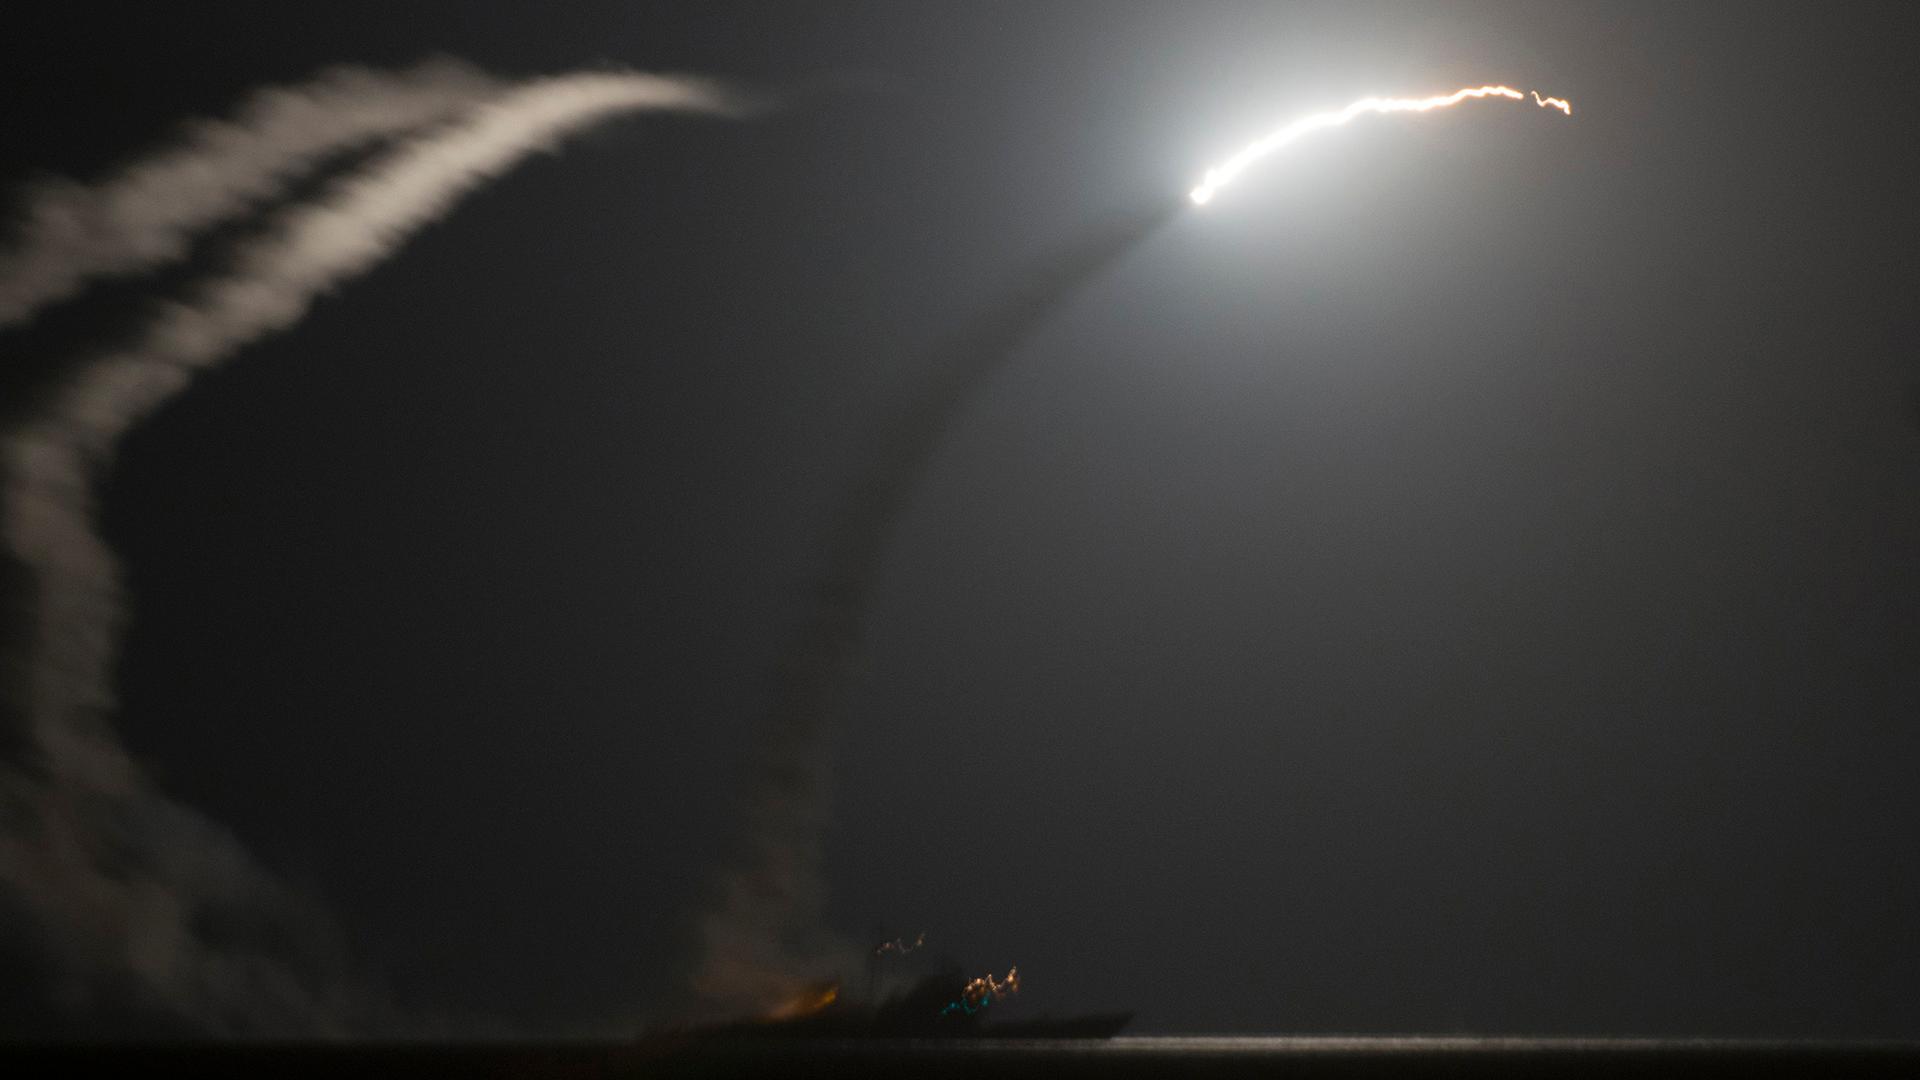 The guided-missile cruiser USS Philippine Sea (CG 58) launches a Tomahawk cruise missile against ISIS targets in Syria on September 23, 2014.